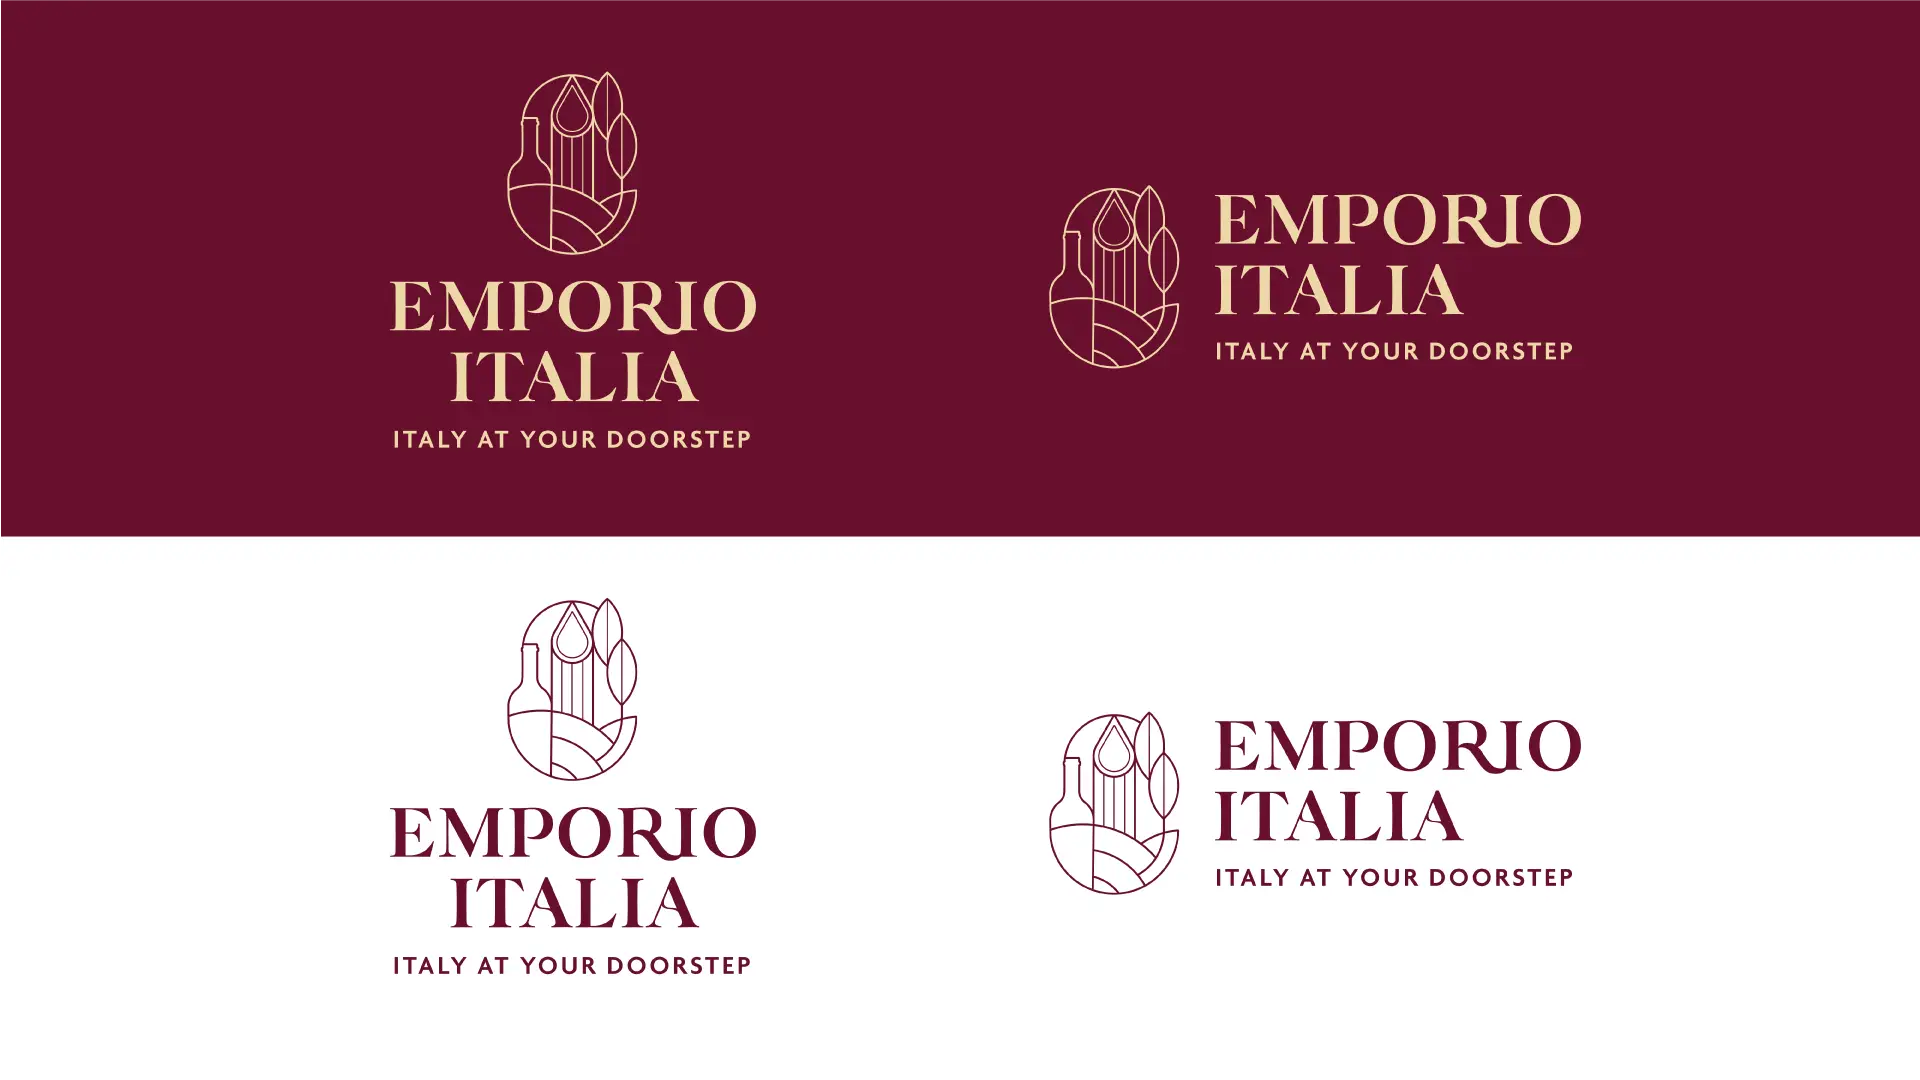 Emporio Italia logo versions, with and without claim, over two different background colours.